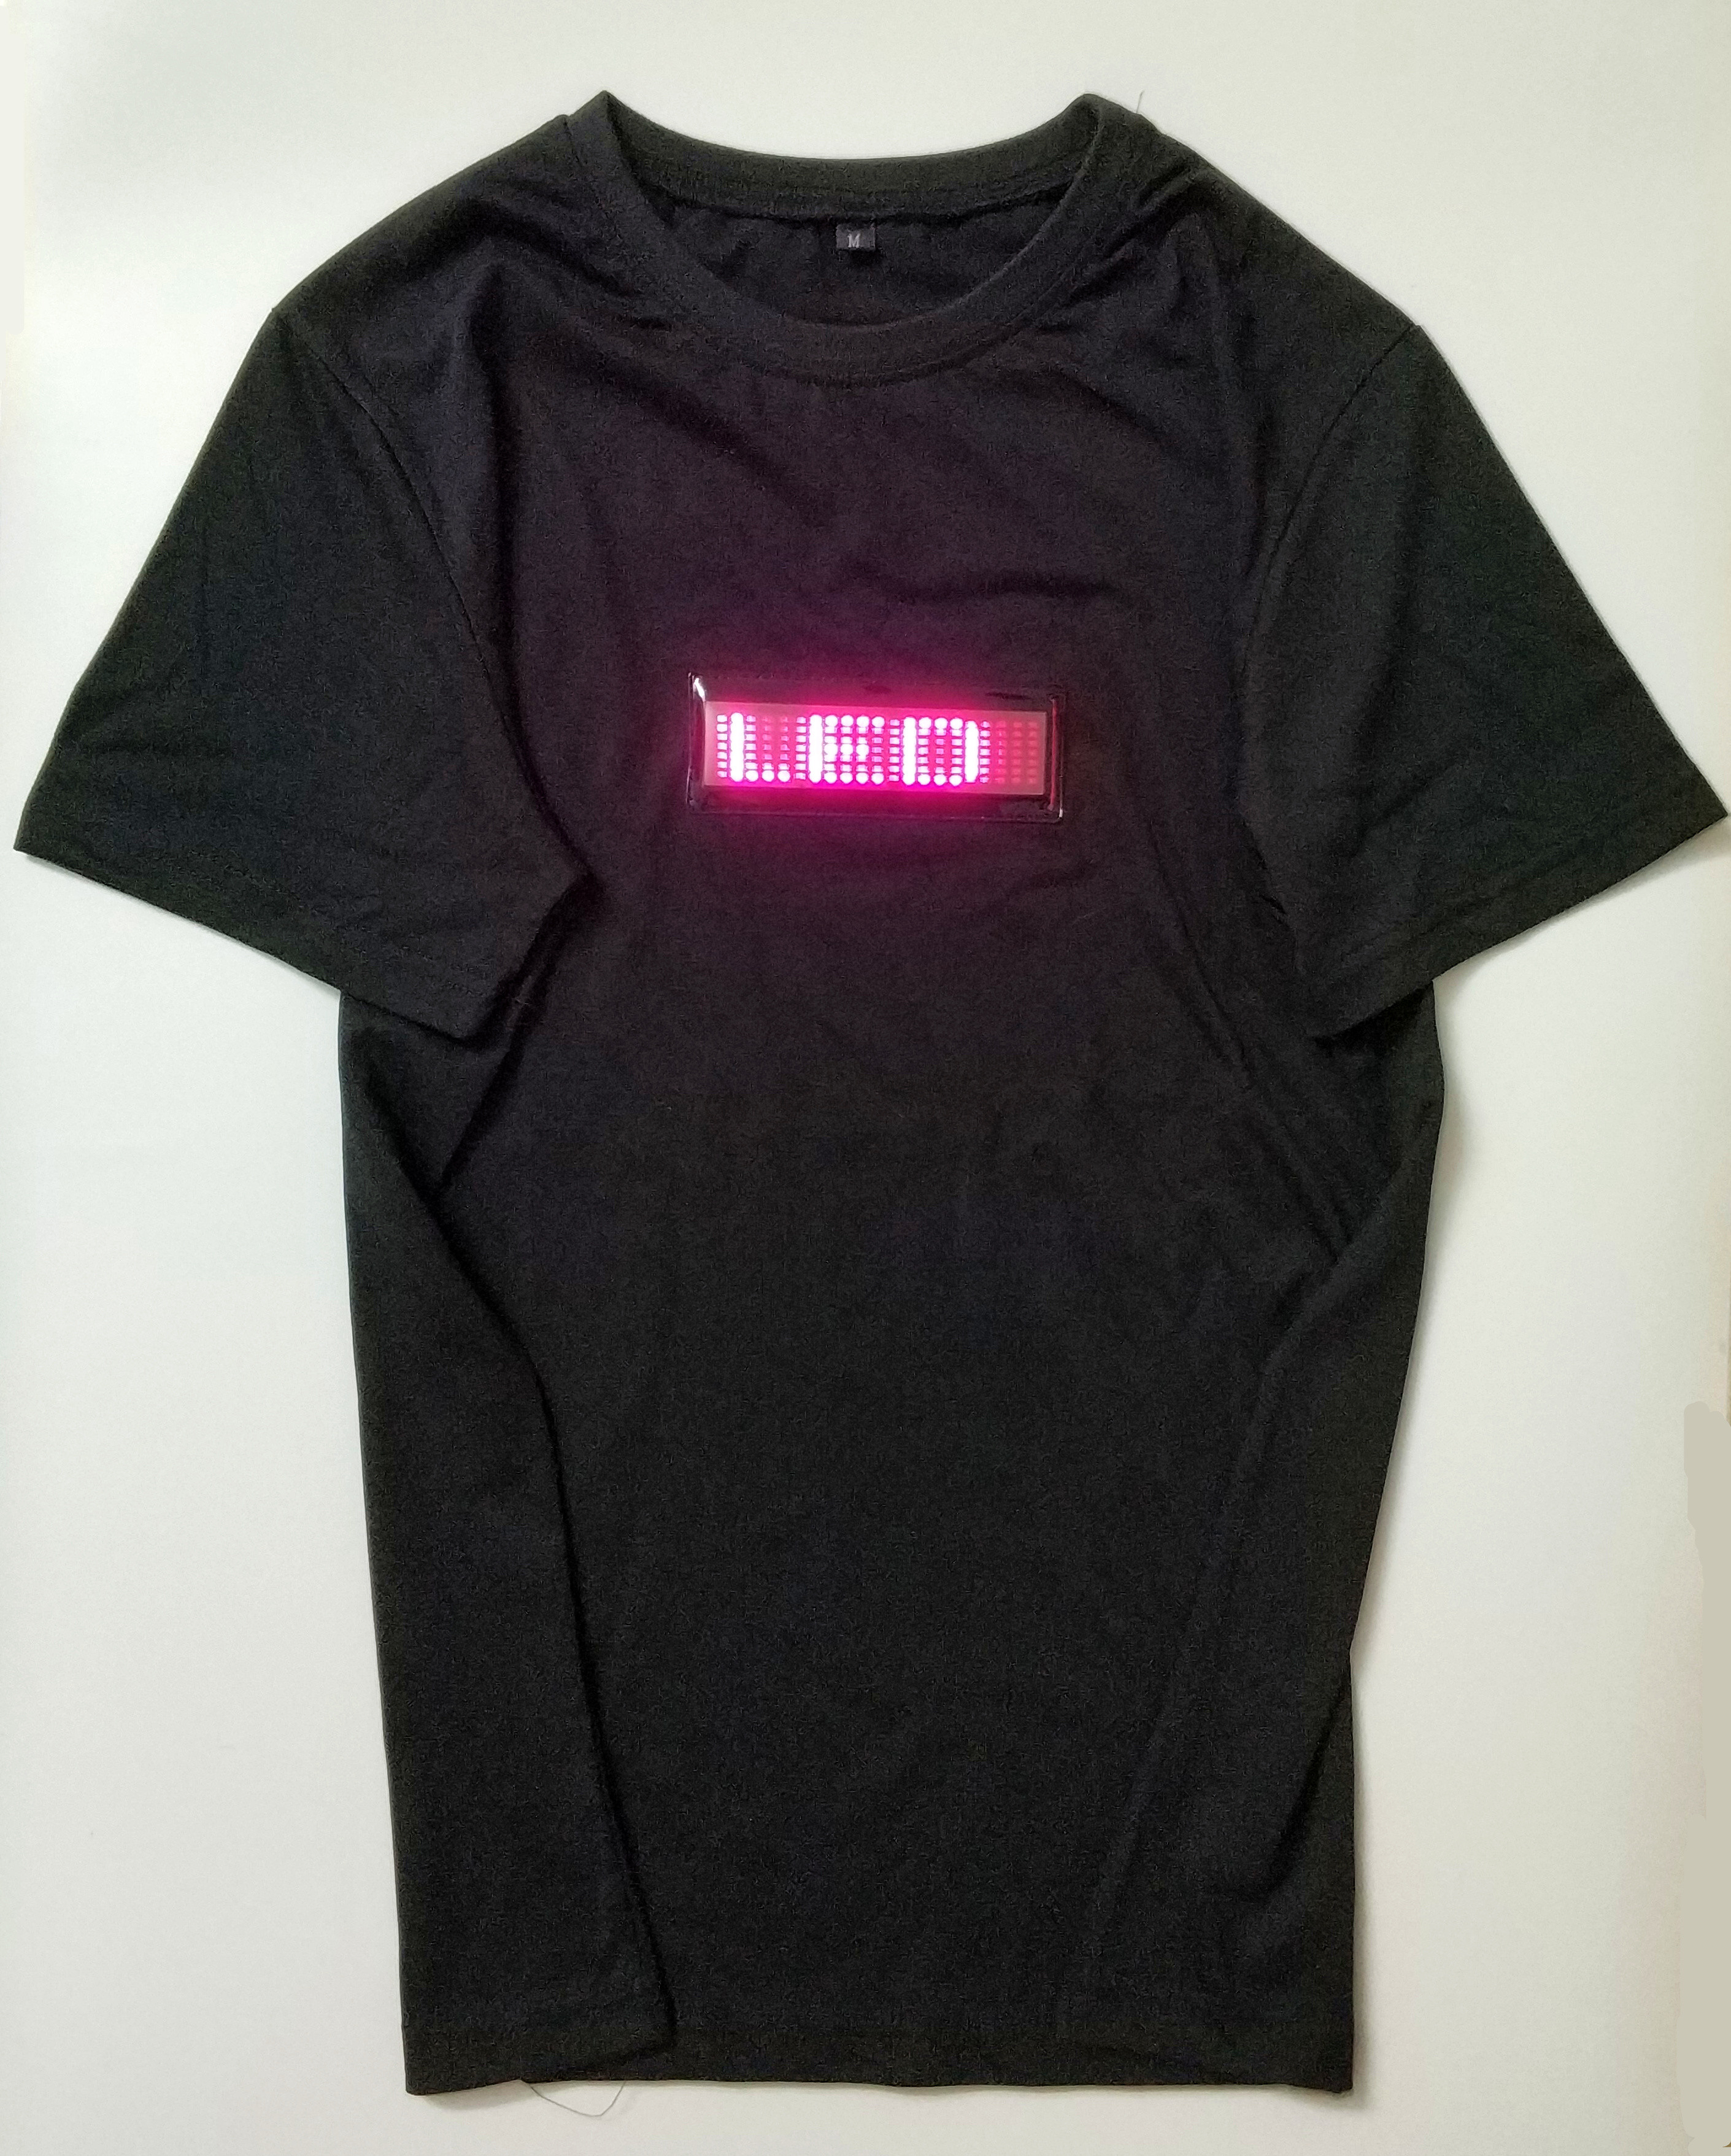 China small wholesale  LED display LED T-shirt  Programmable rolling message flashing LED T-shirt stores up to 6messages factory